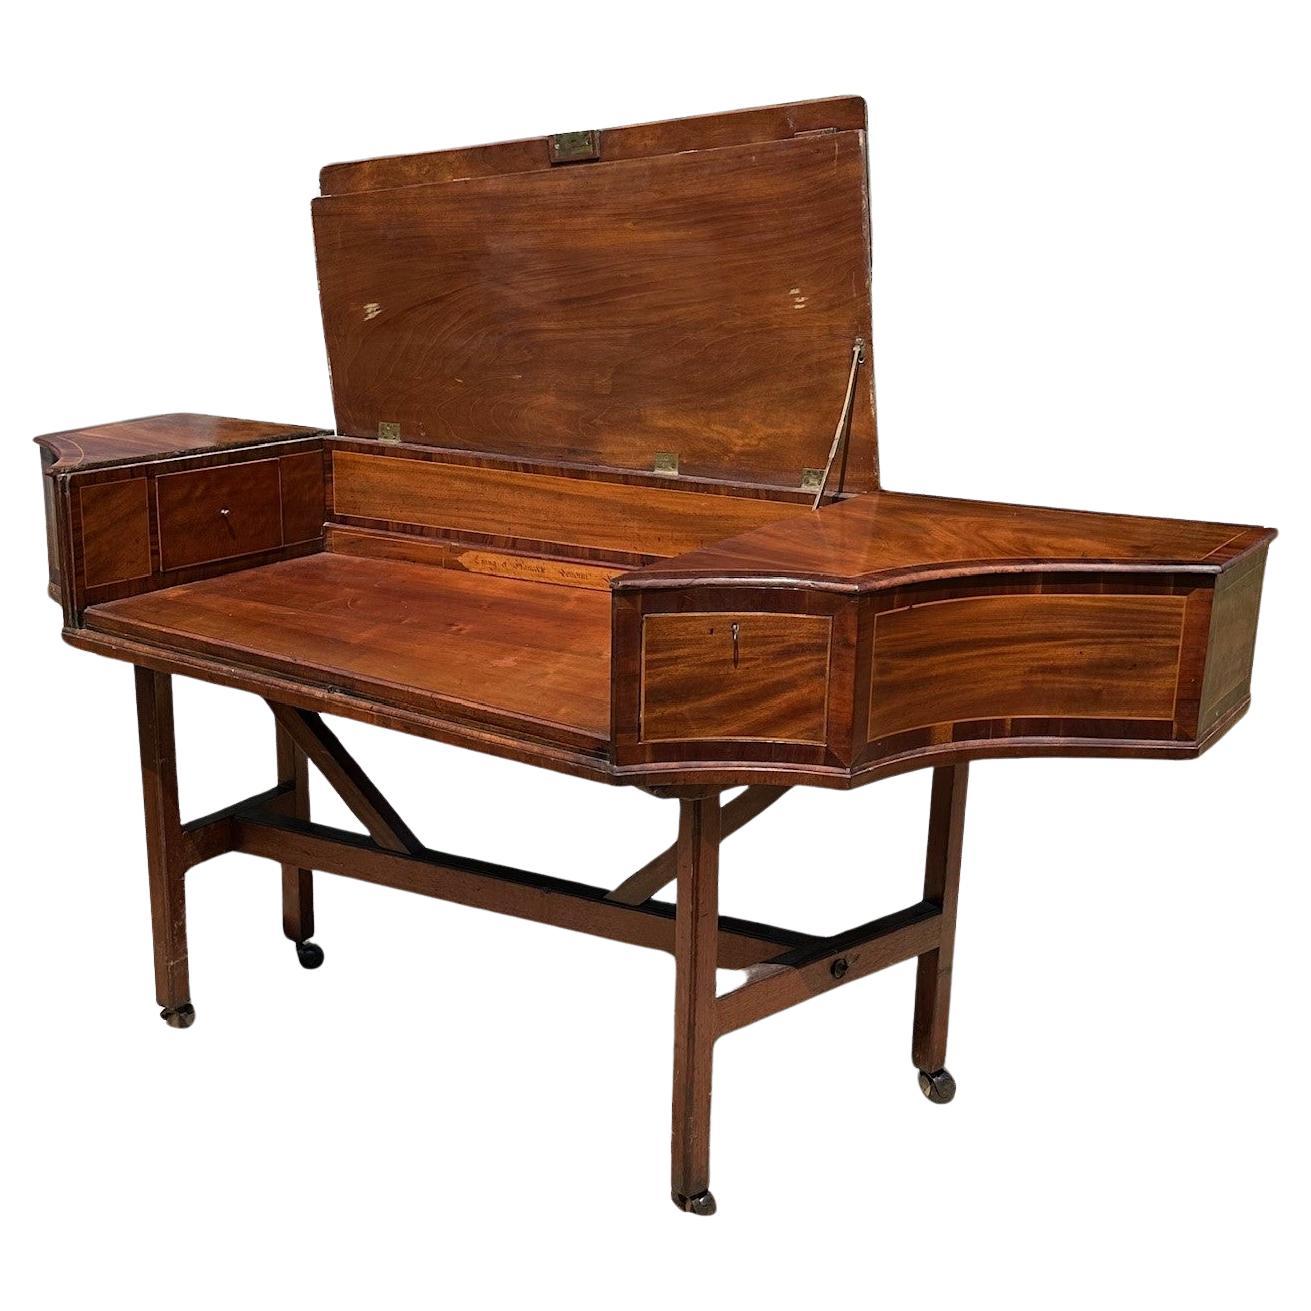 What is the purpose of a spinet desk?